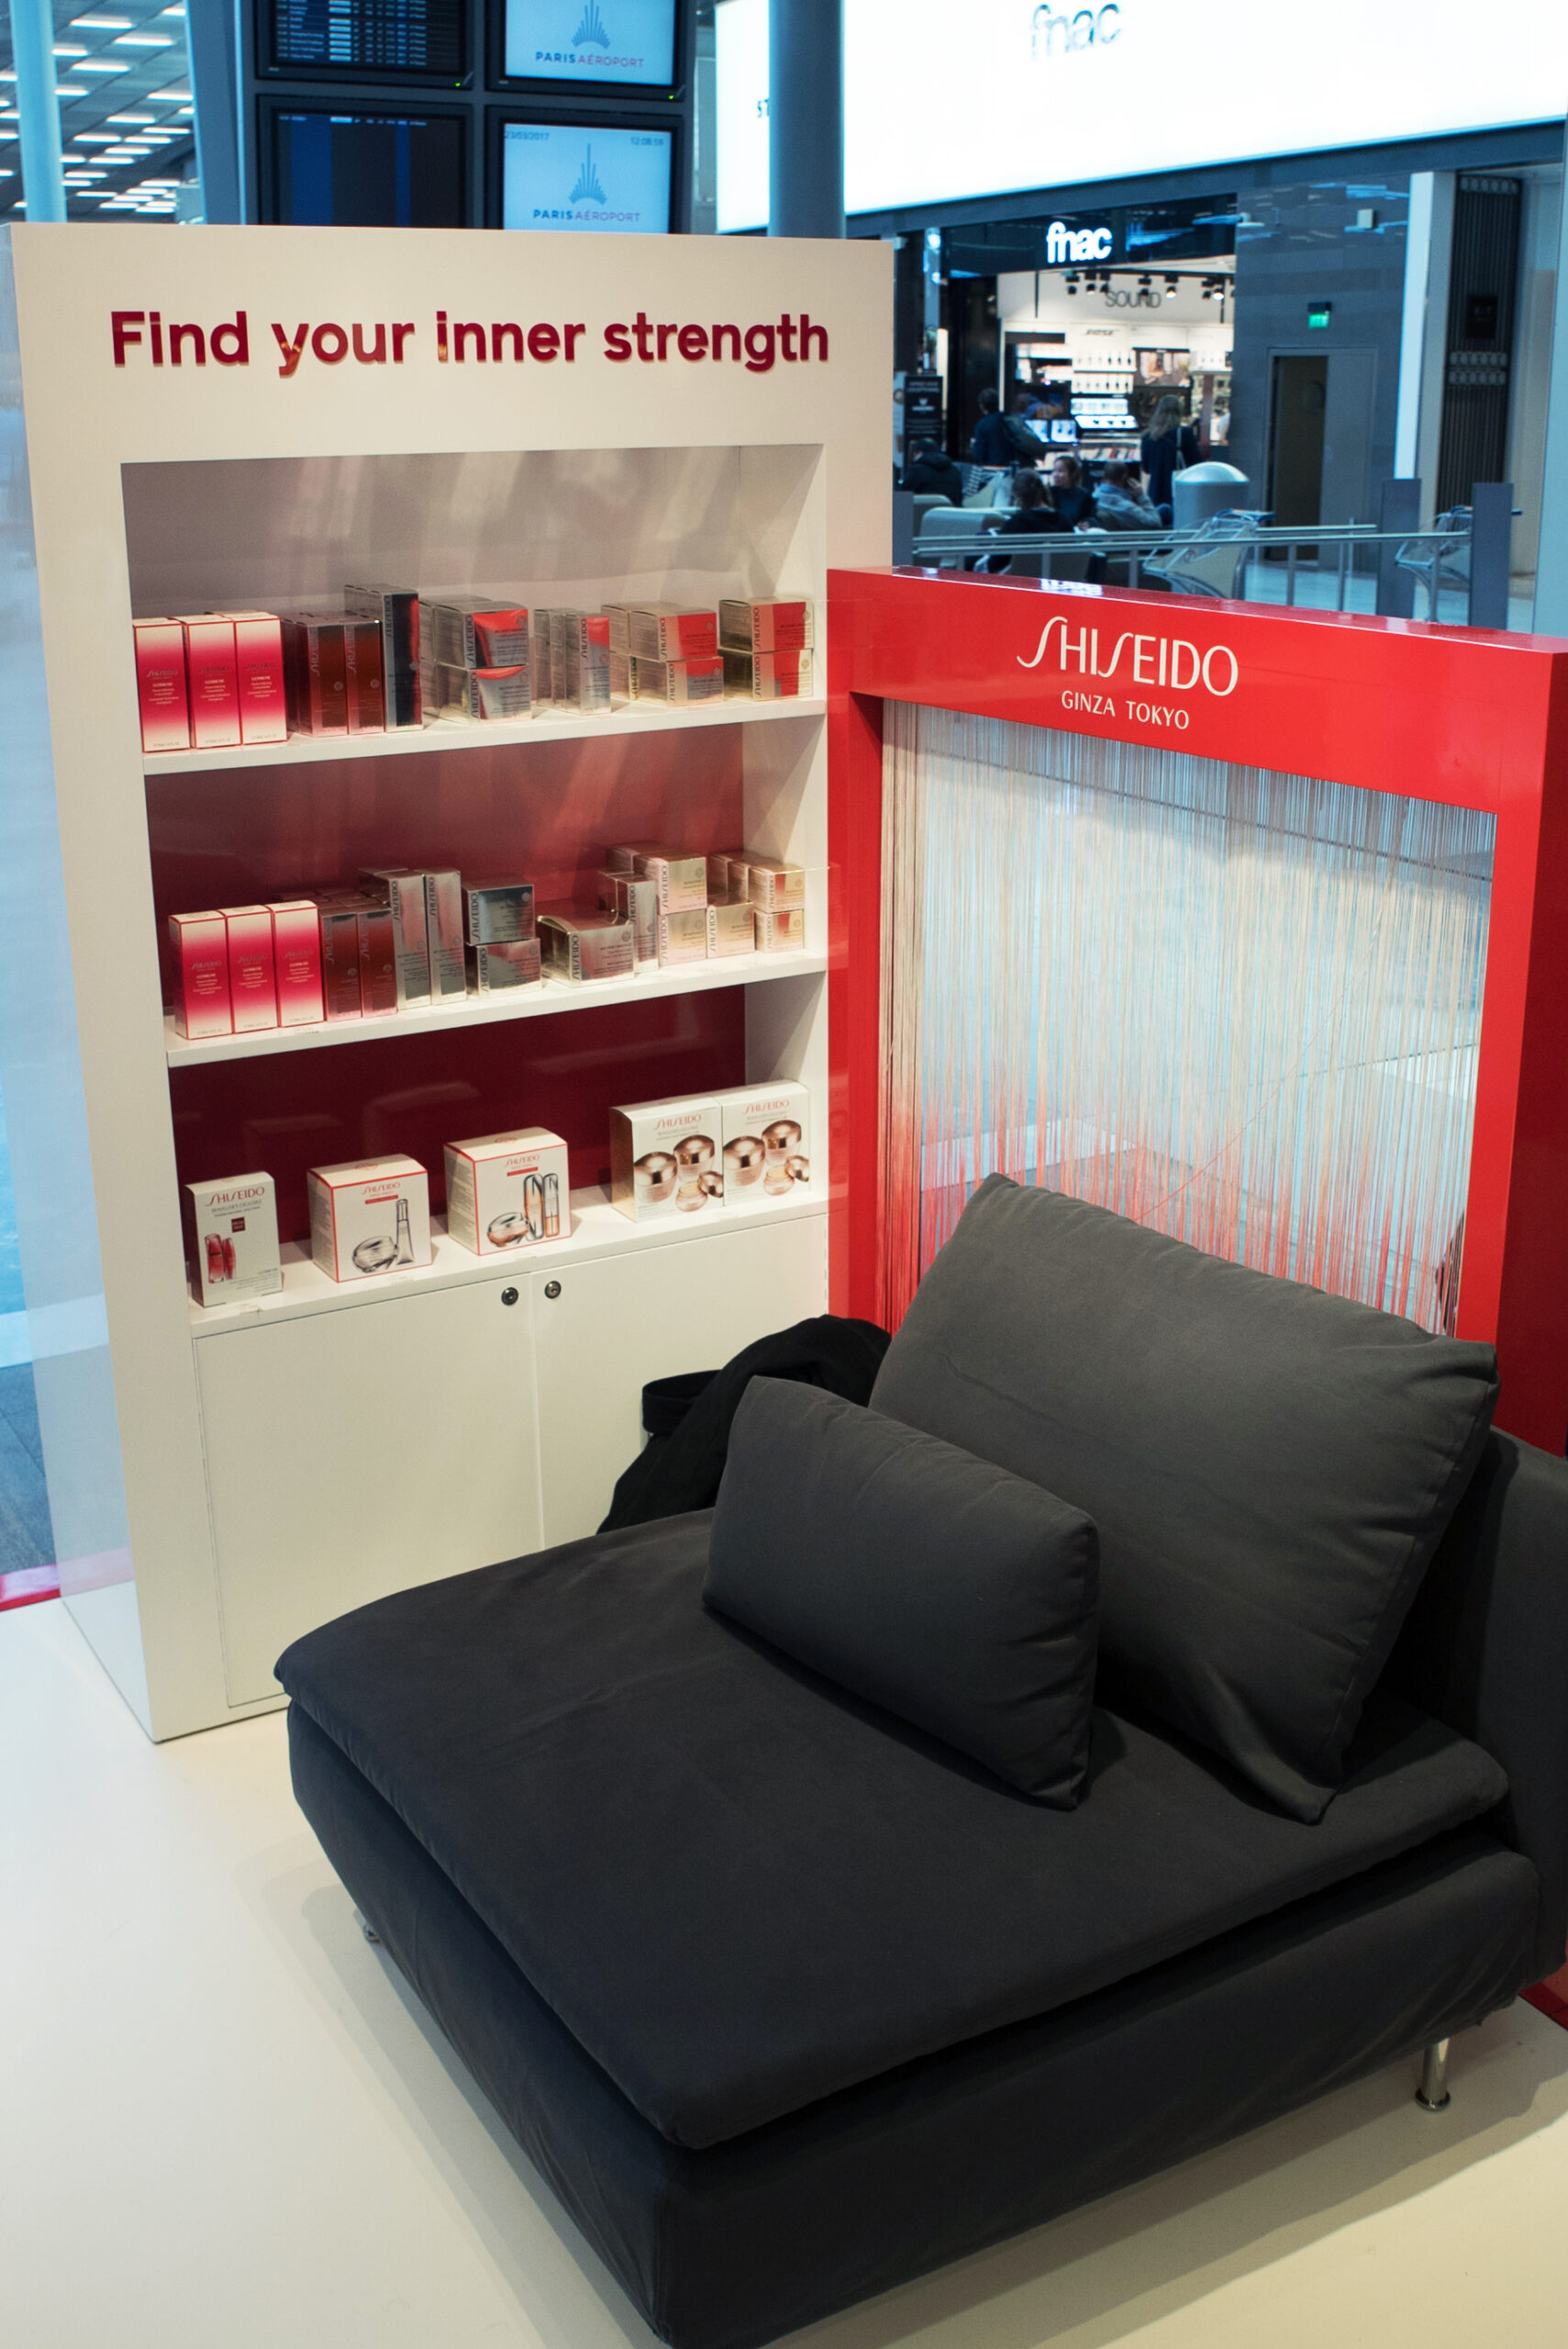 The seating area offers privacy and a chance for travellers to seek advice from one of the on-hand Shiseido Beauty Consultants 